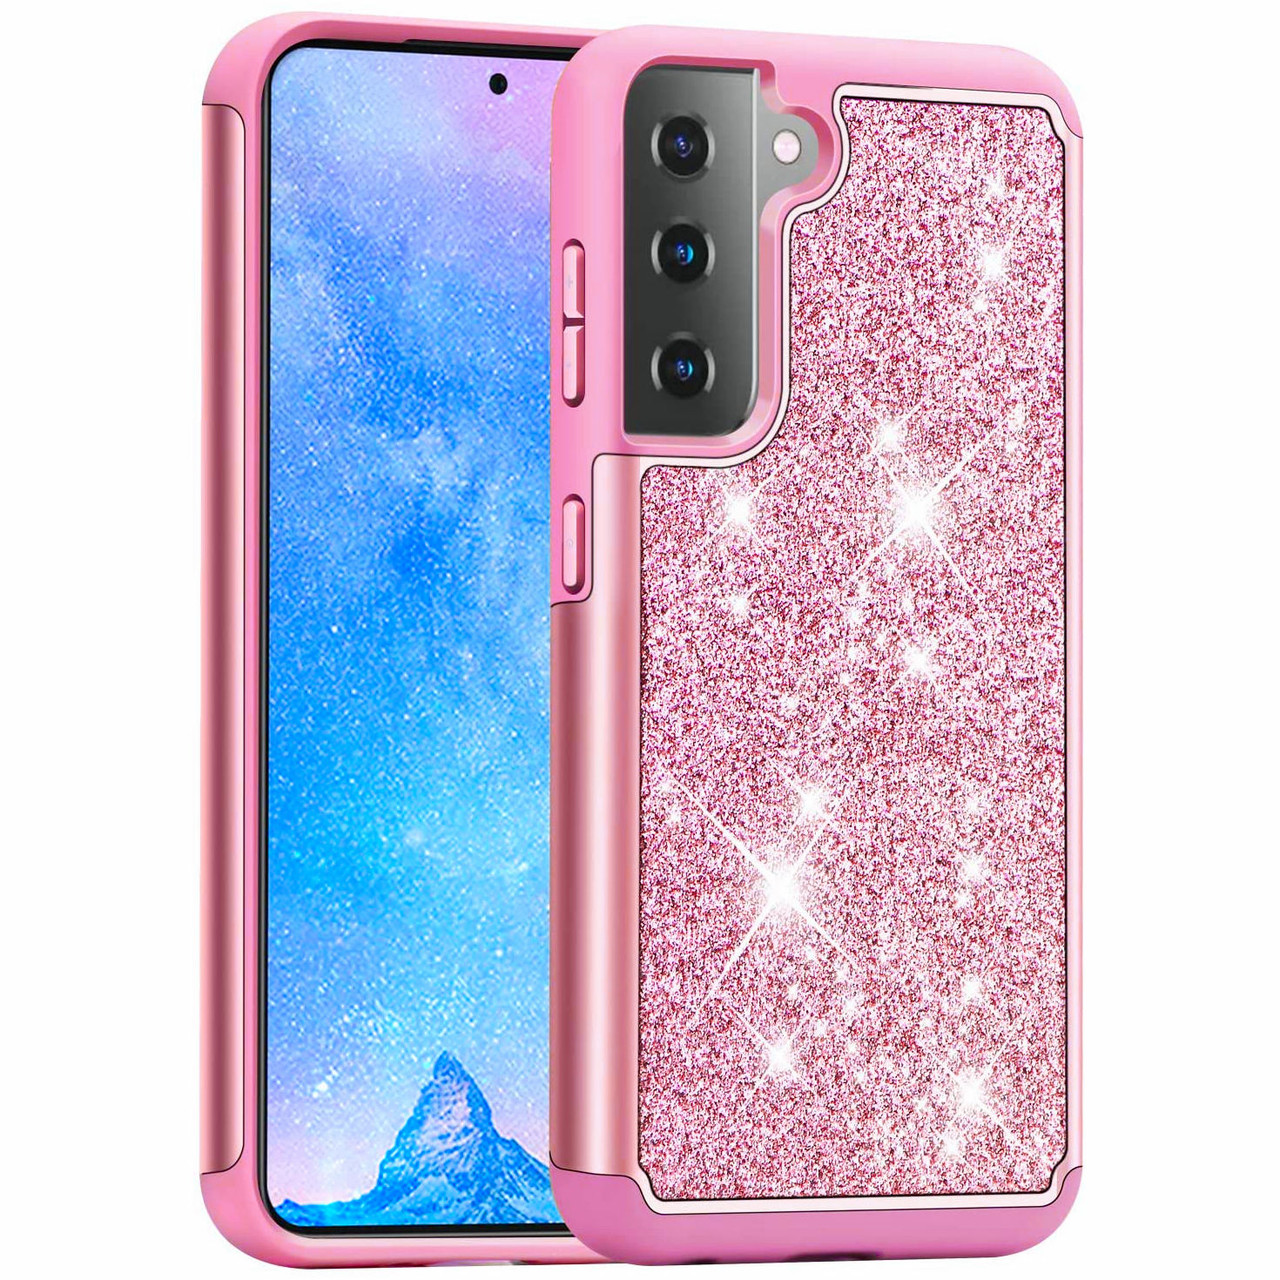 Totaldefense Glitter Hybrid Case For Samsung Galaxy S21 Plus 5g Pink Hd Accessory